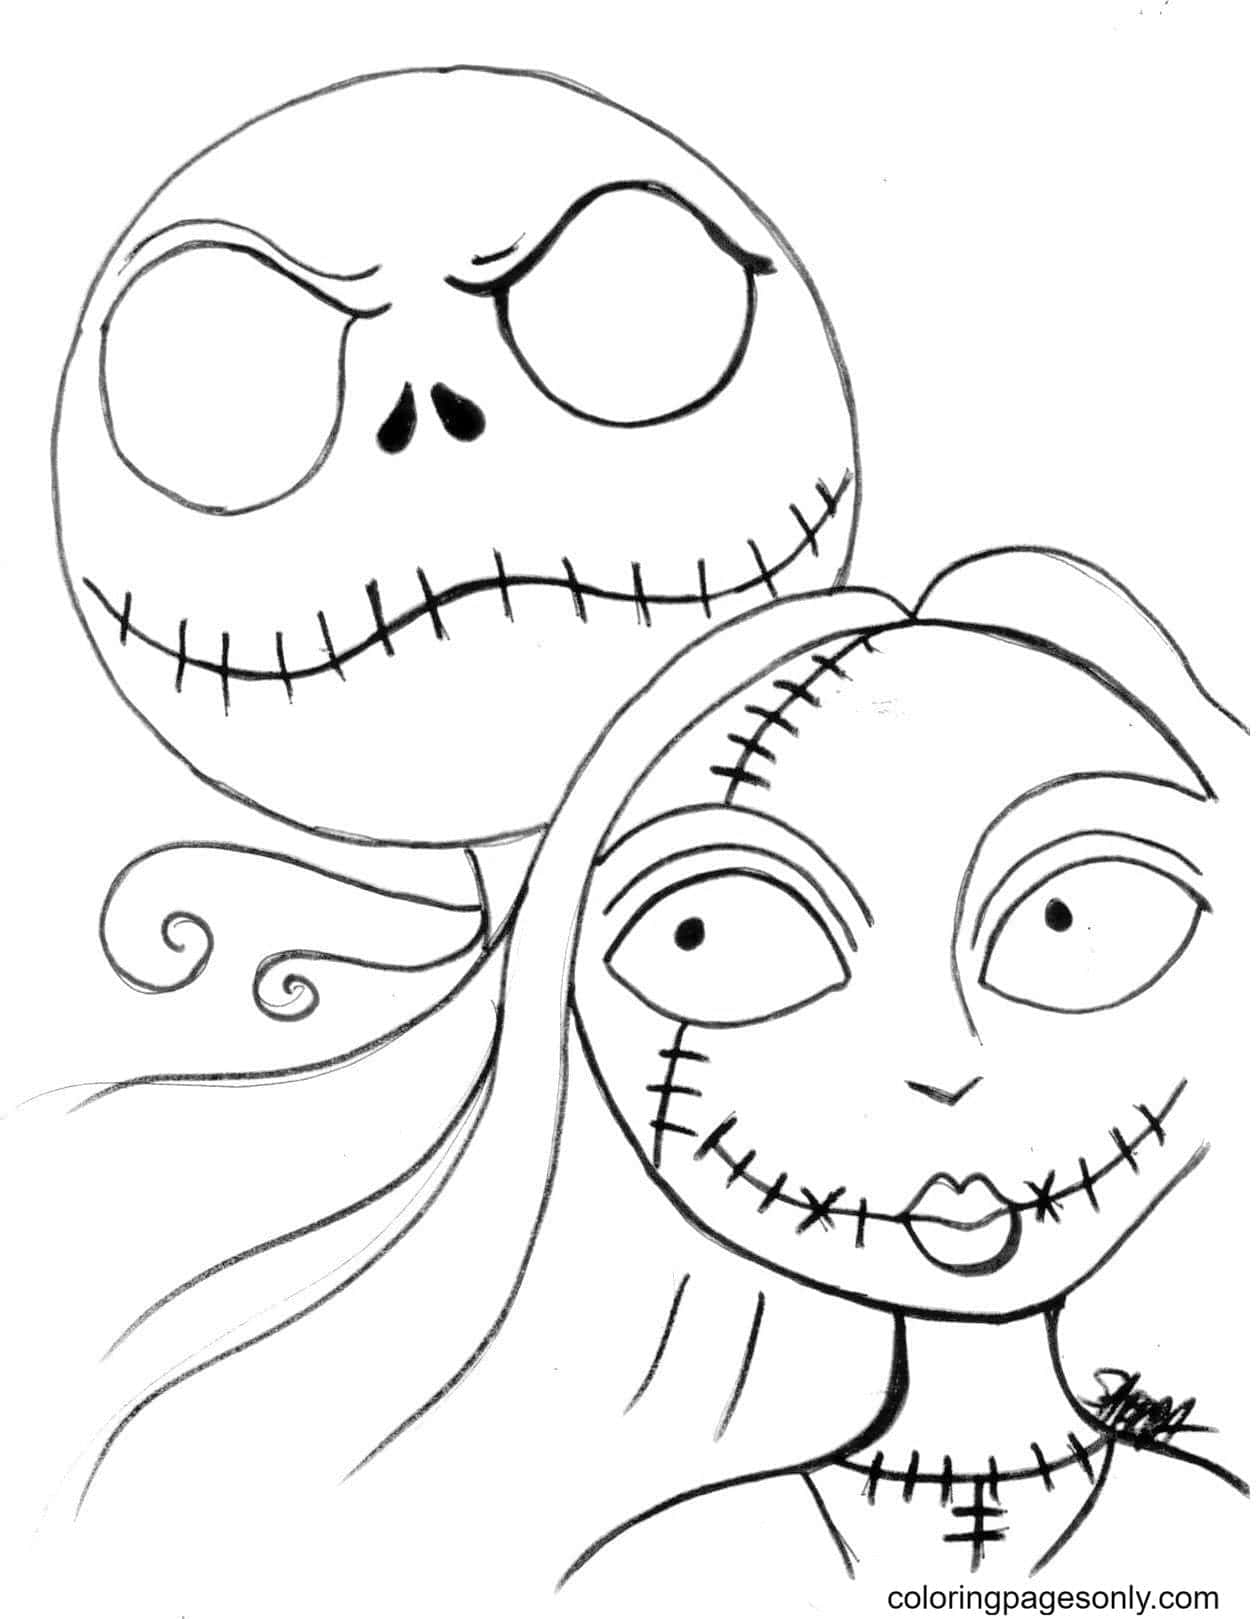 Nightmare before christmas coloring pages